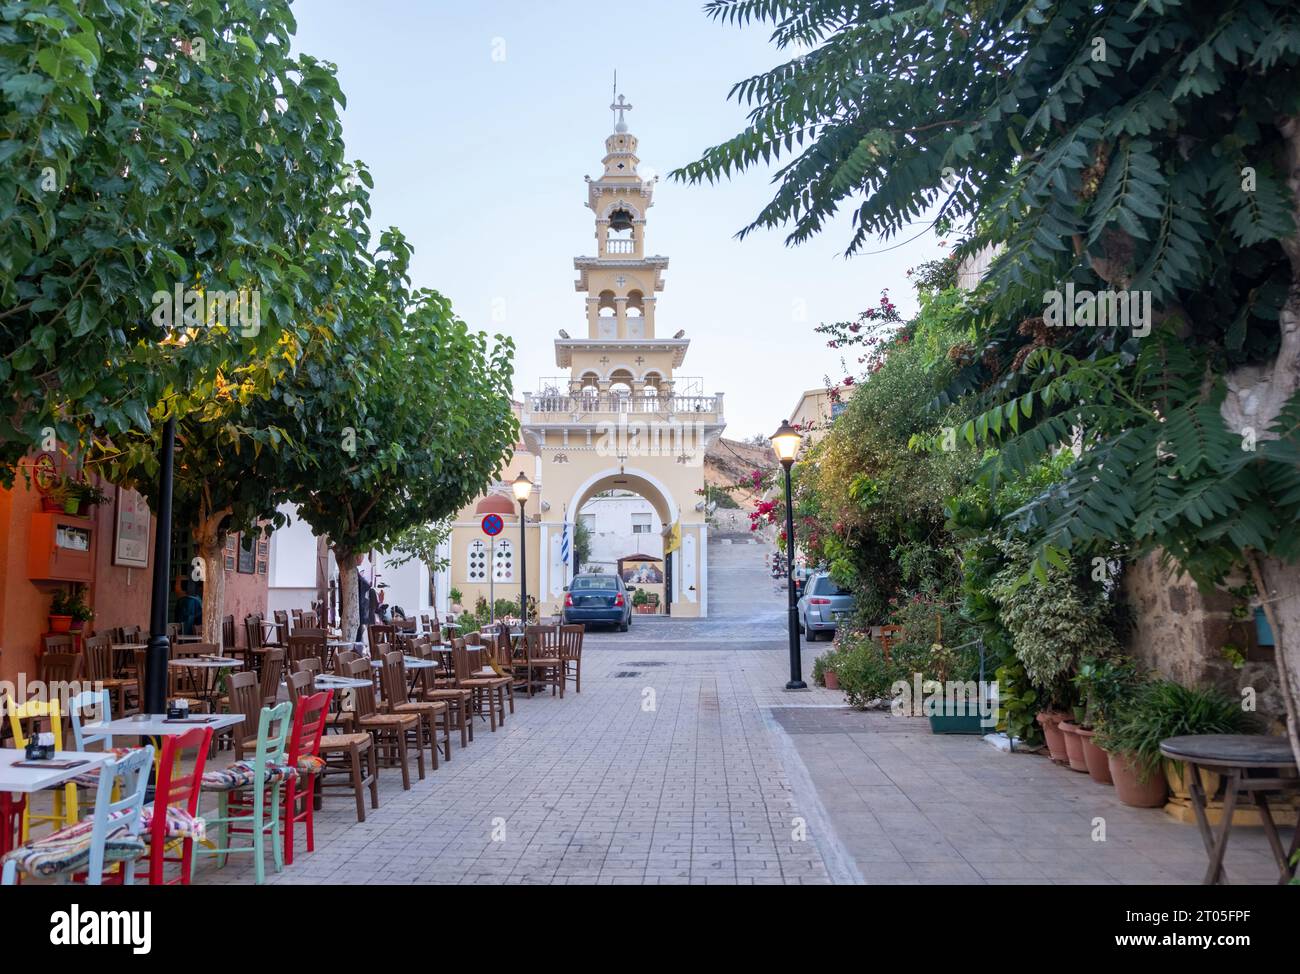 Evangelistra Church Palaiochora Chania, Crete island, Greece. Outdoors cafe on paved street, arched belfry entrance in the afternoon. Stock Photo